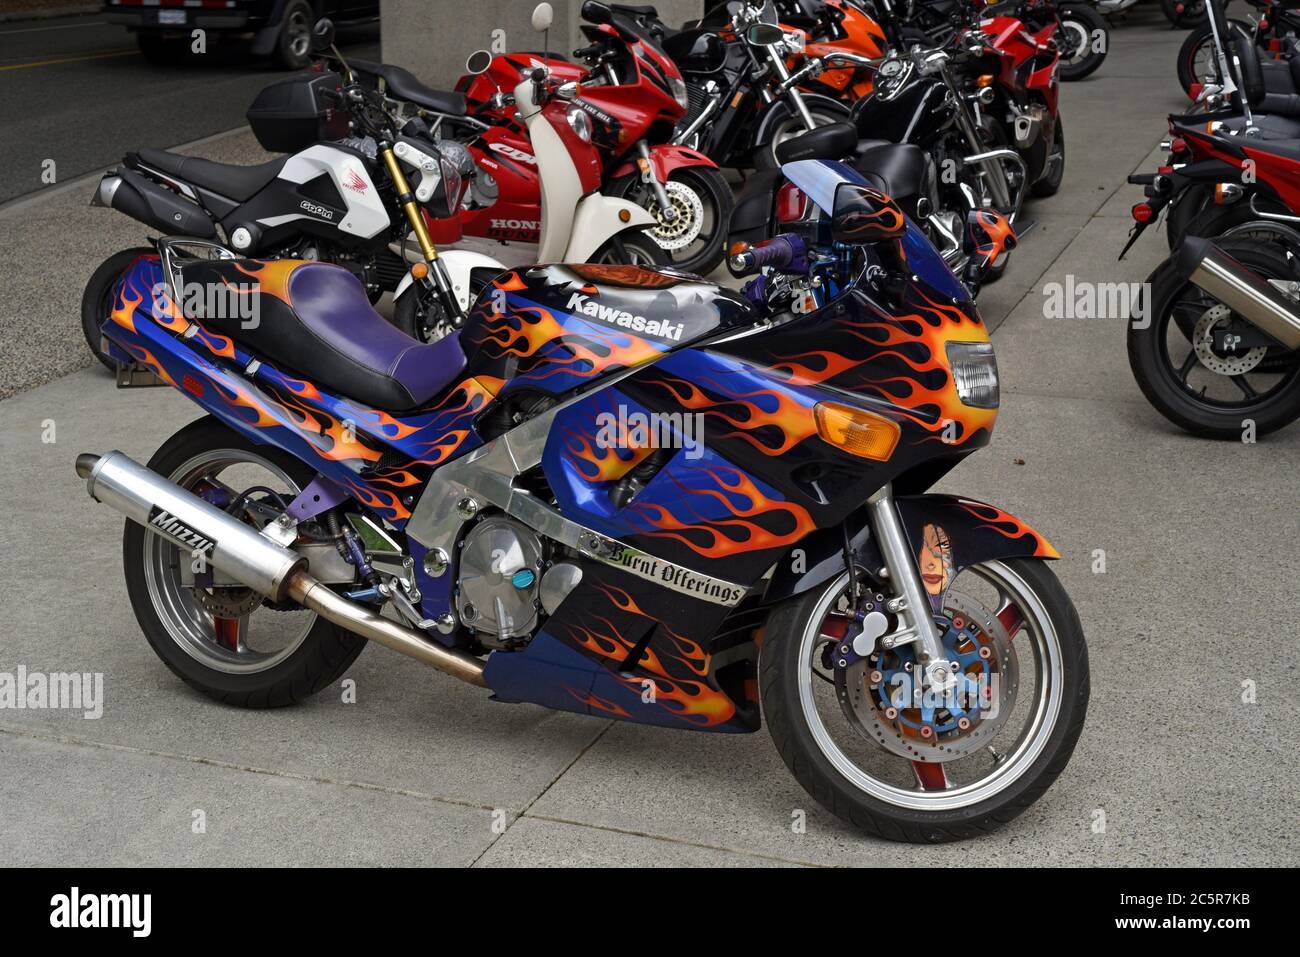 A Kawasaki motorcyle with a flame paint job sits with other bikes outside a  motorcycle dealership in Vancouver, British Columbia, Canada Stock Photo -  Alamy